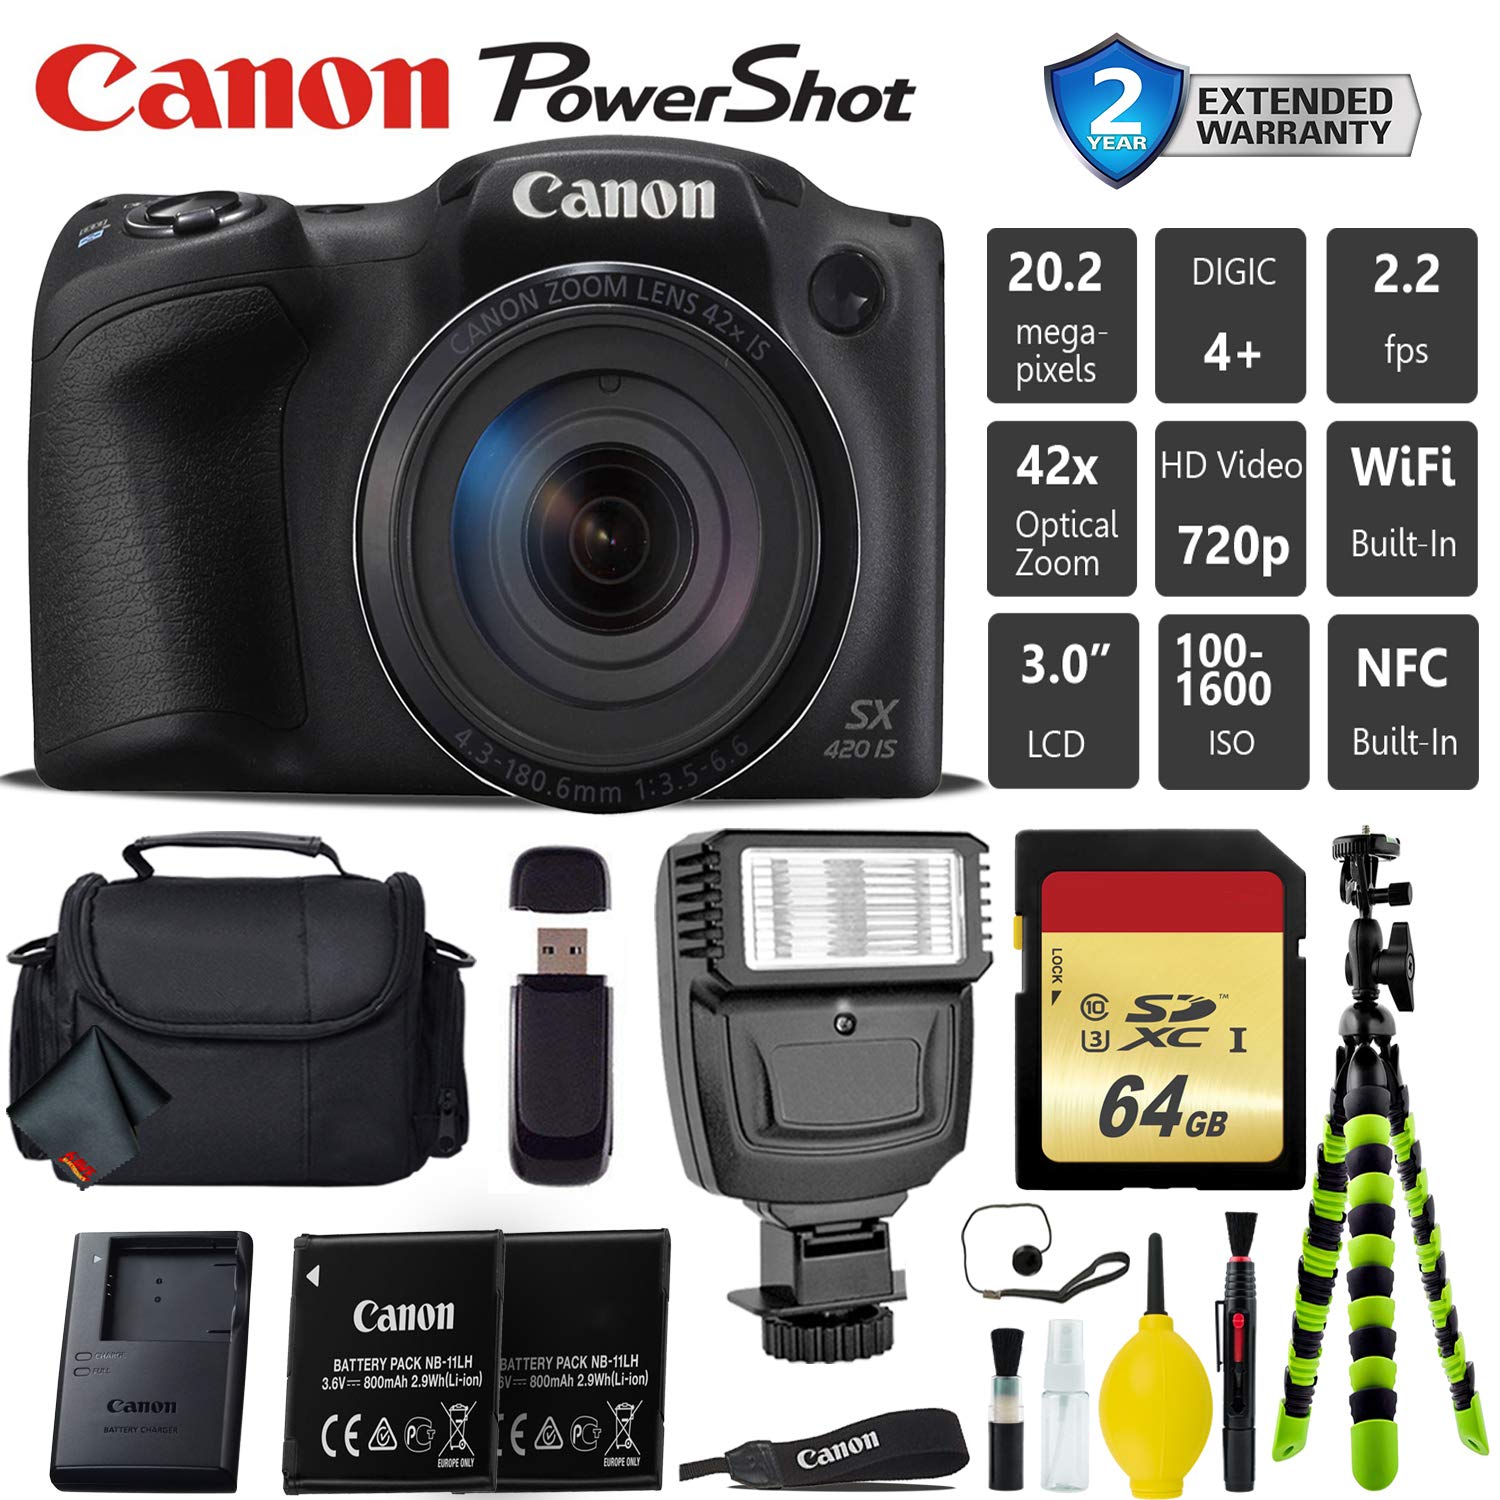 Canon PowerShot SX420 is Digital Point and Shoot Camera + Extra Battery + Digital Flash + Camera Case + 64GB Class 10 Card Professional Bundle